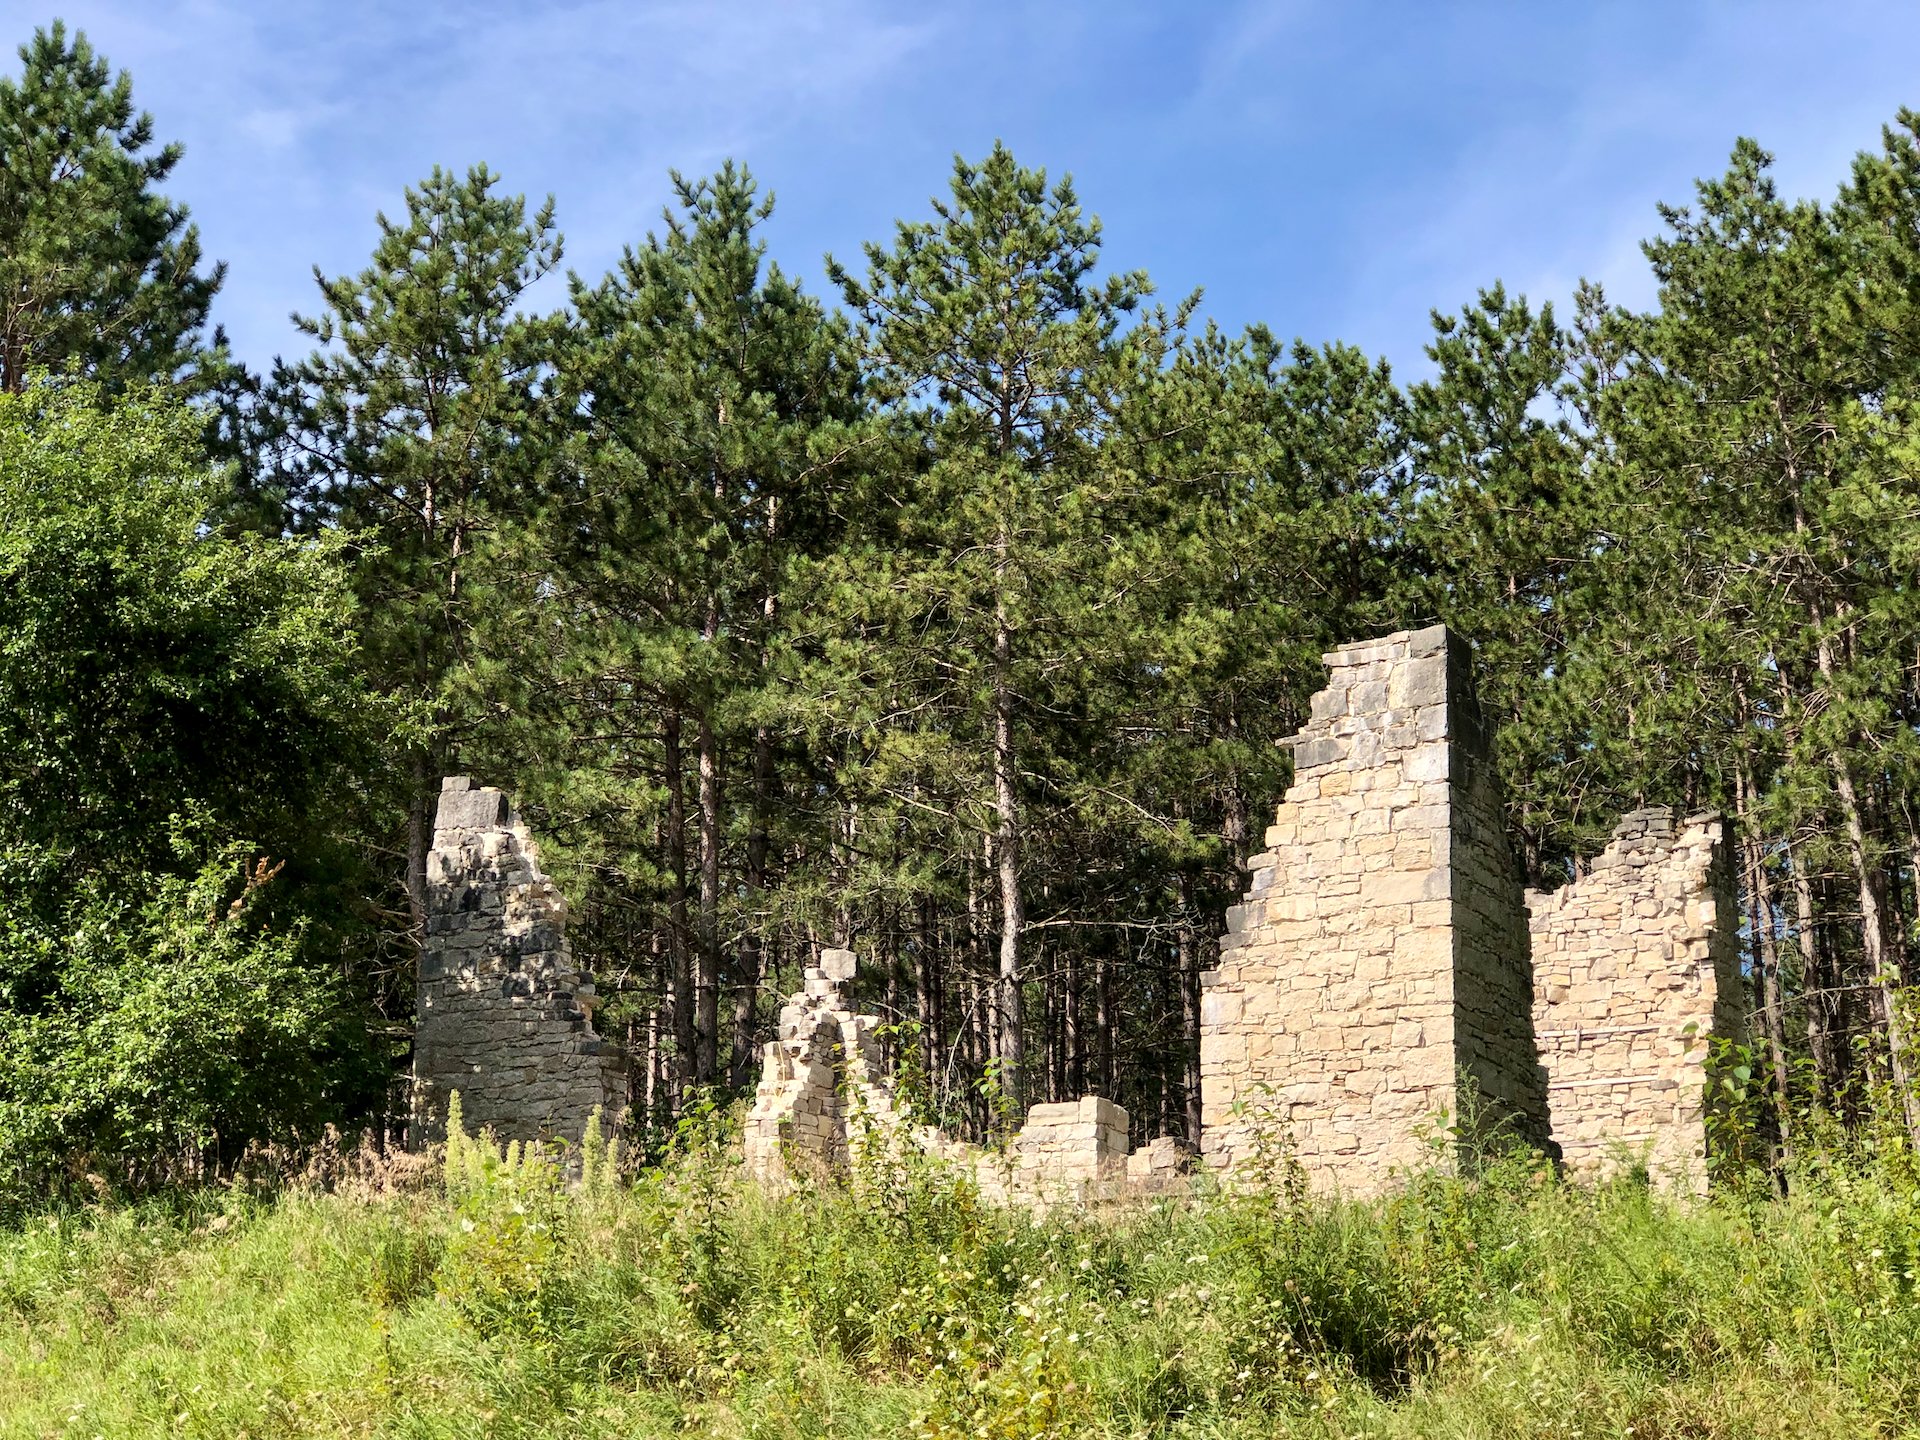  The ruins of one of the old buildings on the property. 